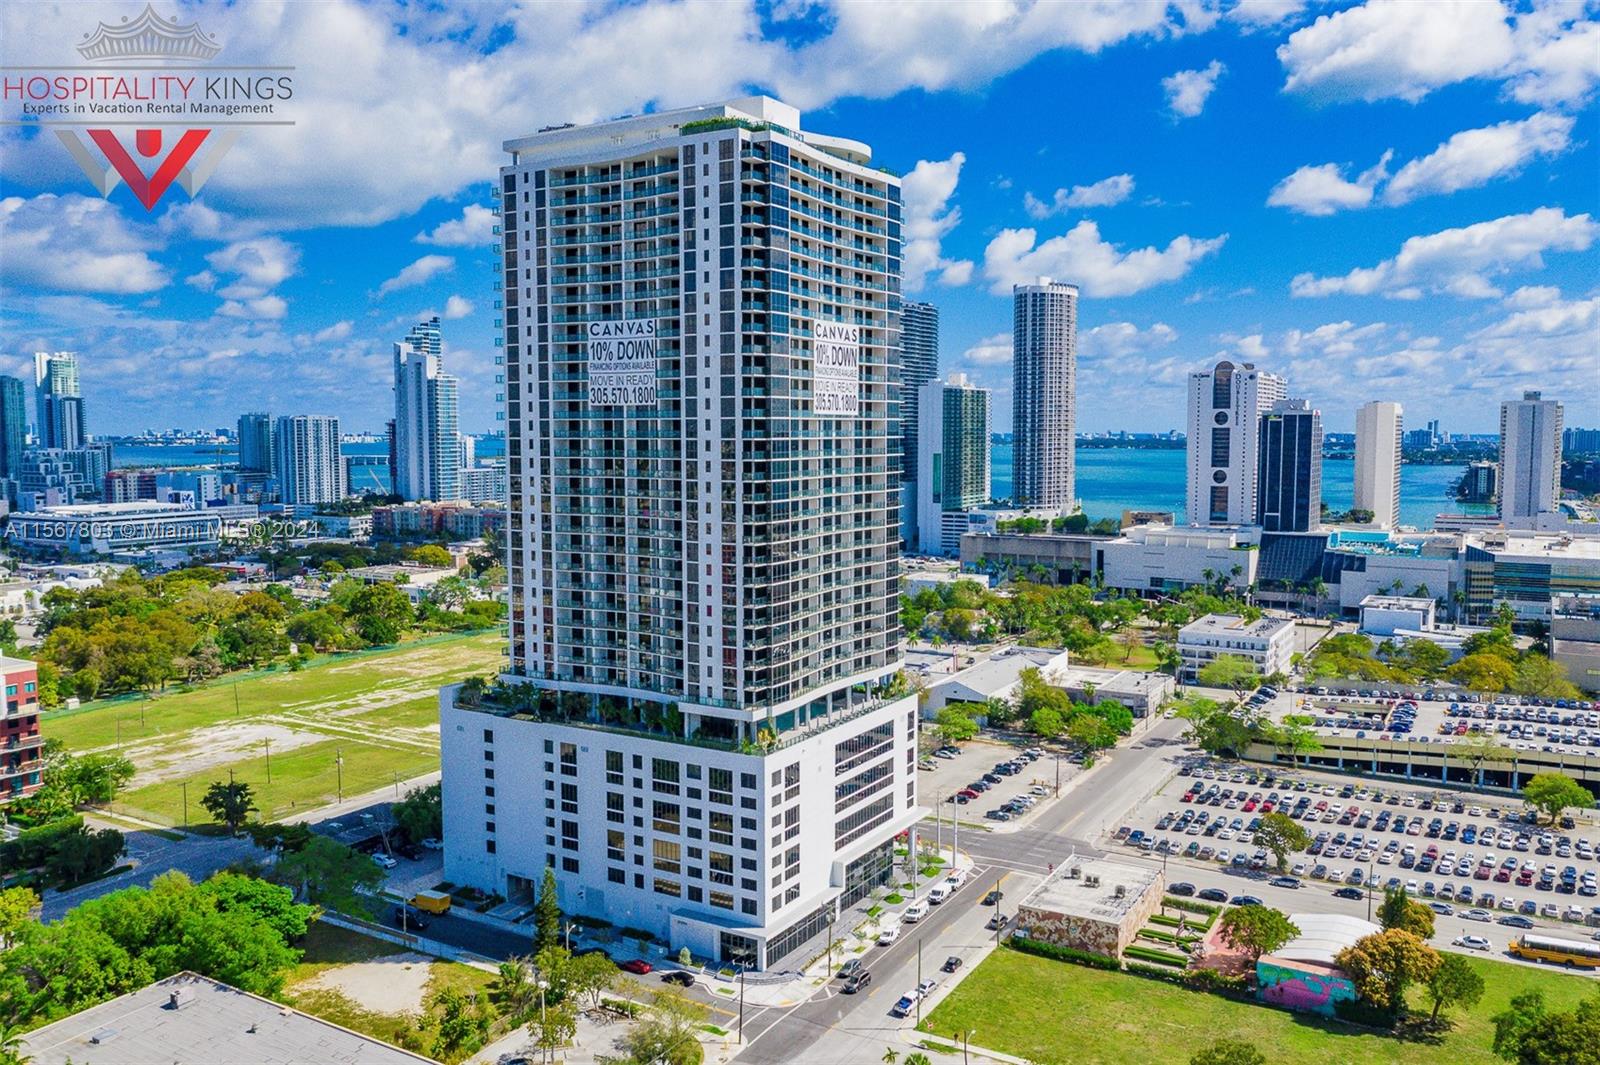 High floor corner unit 2 bed 2 baths 1110 SQ FT in the A&E District. Incredible water, sunset and city views, great location, easy access on/off major hgihways. 30,000 square feet of amenities including Sunrise Pool, Sunset Pool, Rooftop Pool Jacuzzi, Sun Deck, 3,000 sqft state of the art gym, Spa, Sauna & Treatment Room, Racquetball Court, Theater, Social Room, Indoor/Outdoor 24/7 security, concierge, management on site, self parking, valet on site, motivated owner.